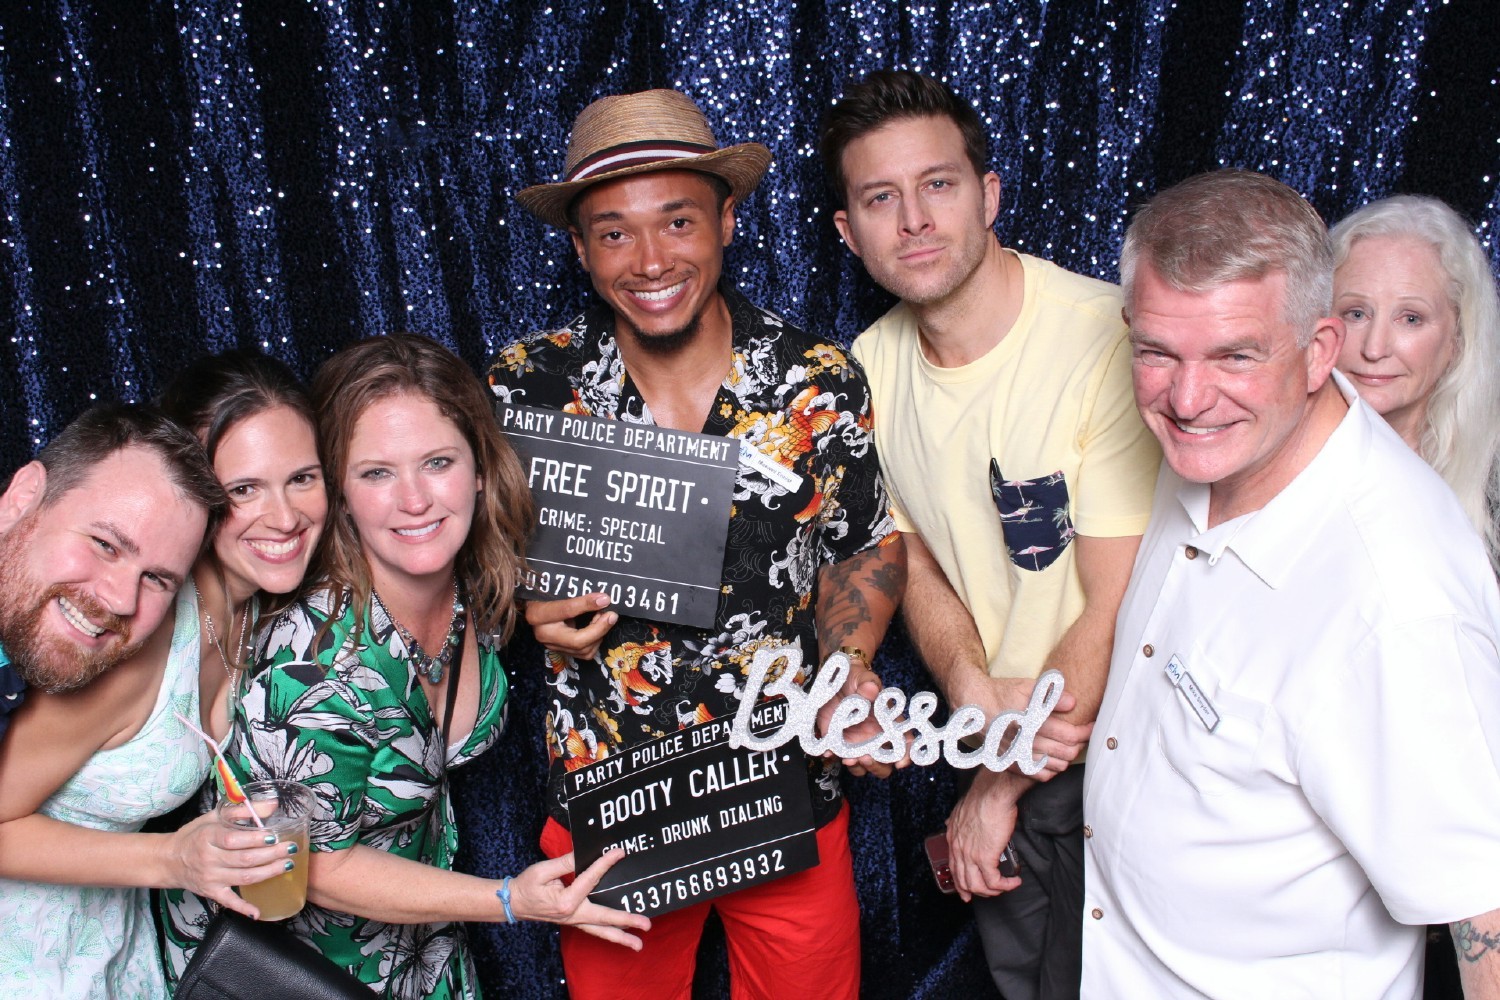 EM Key & Guests Piling into the Photobooth for a Pic